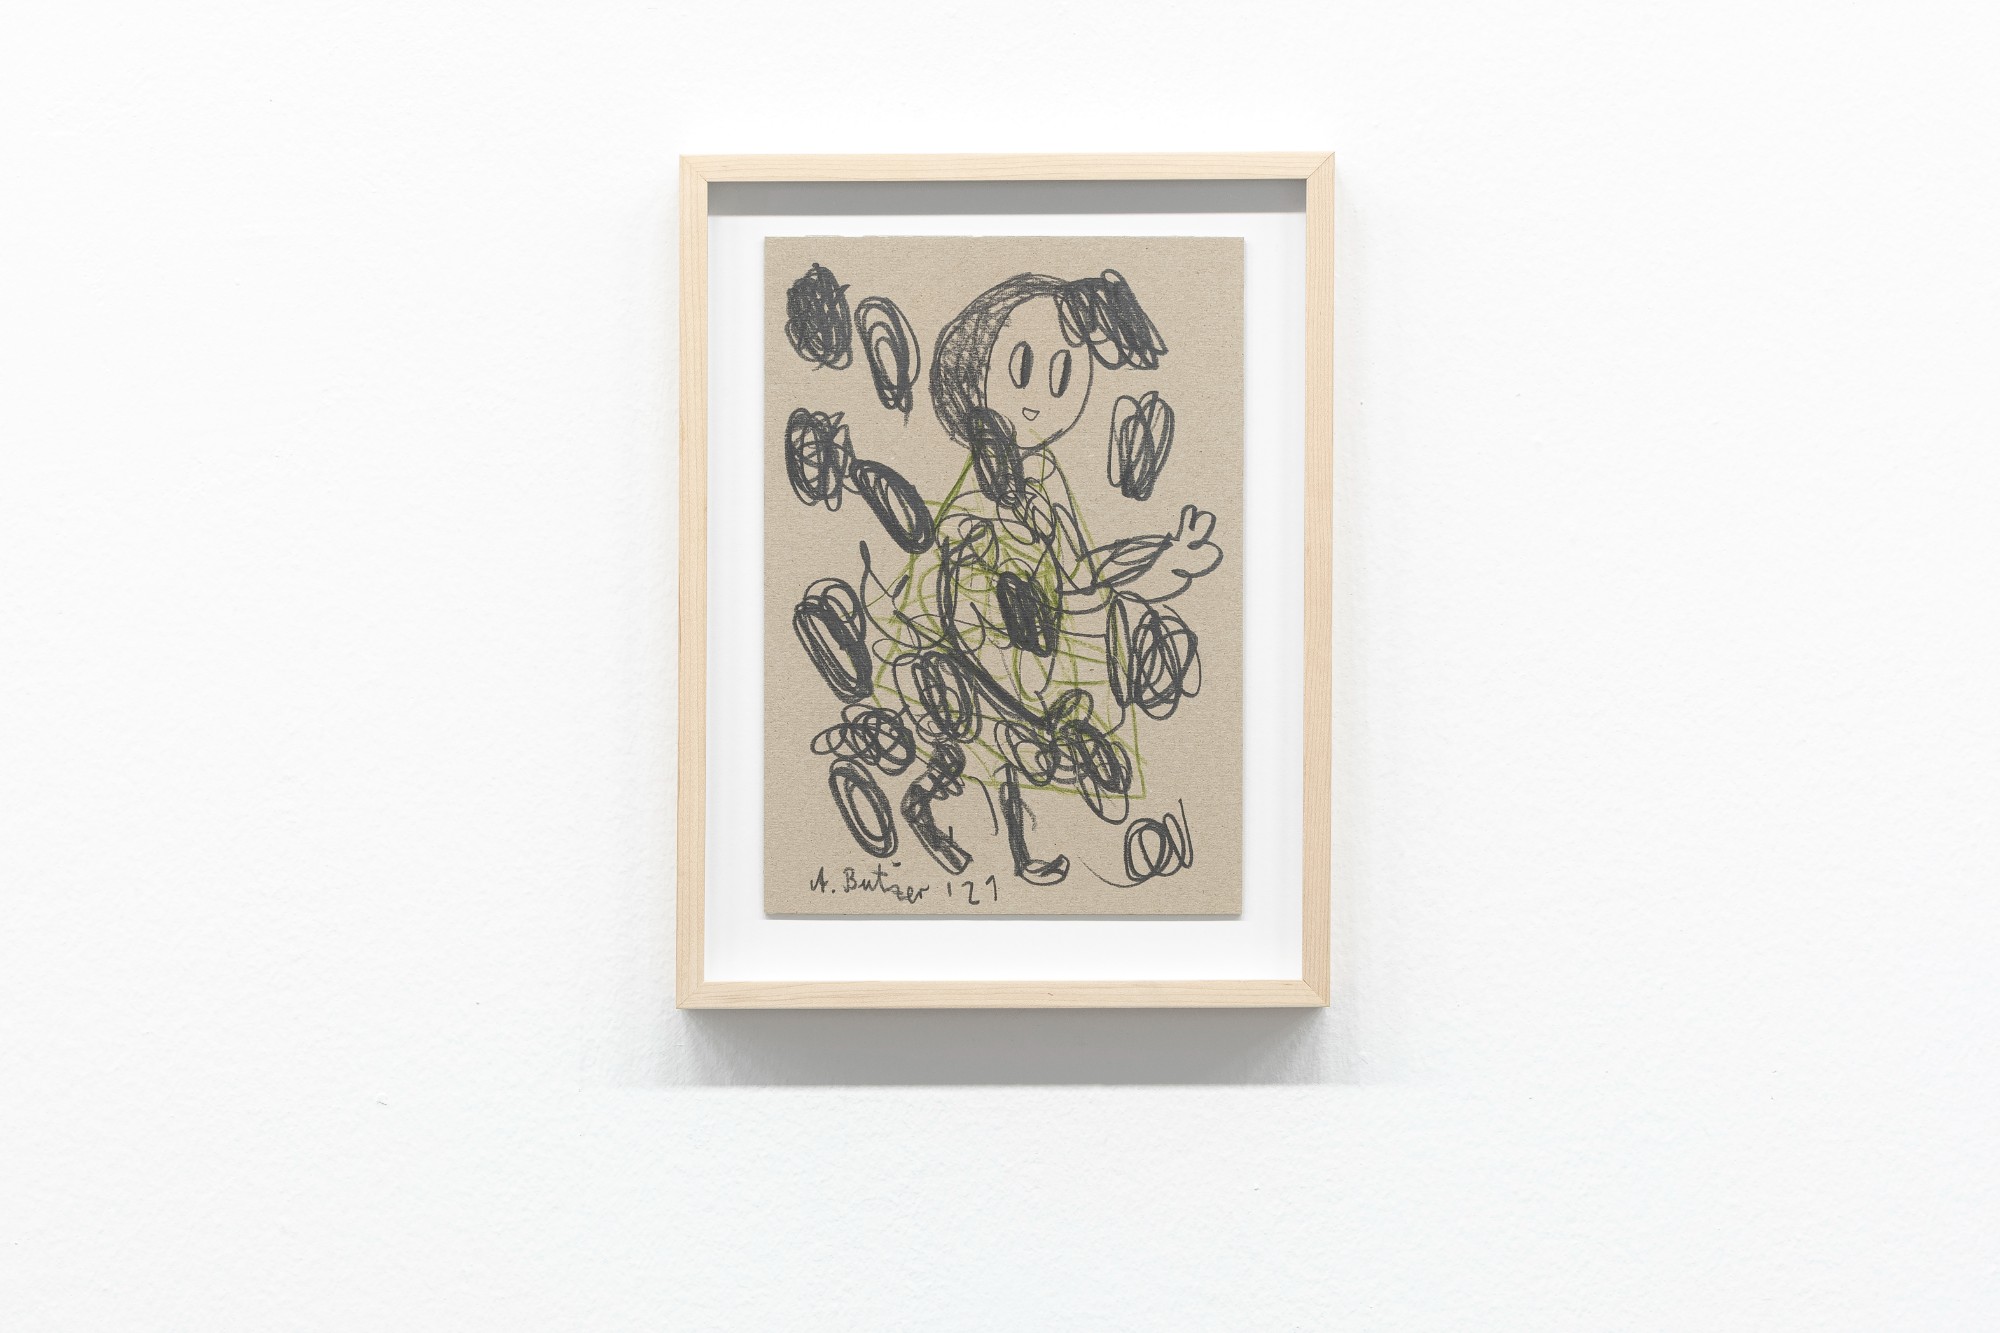 André Butzer, untitled, 2021, graphite and crayon on cardboard, 29,7 x 21 cm